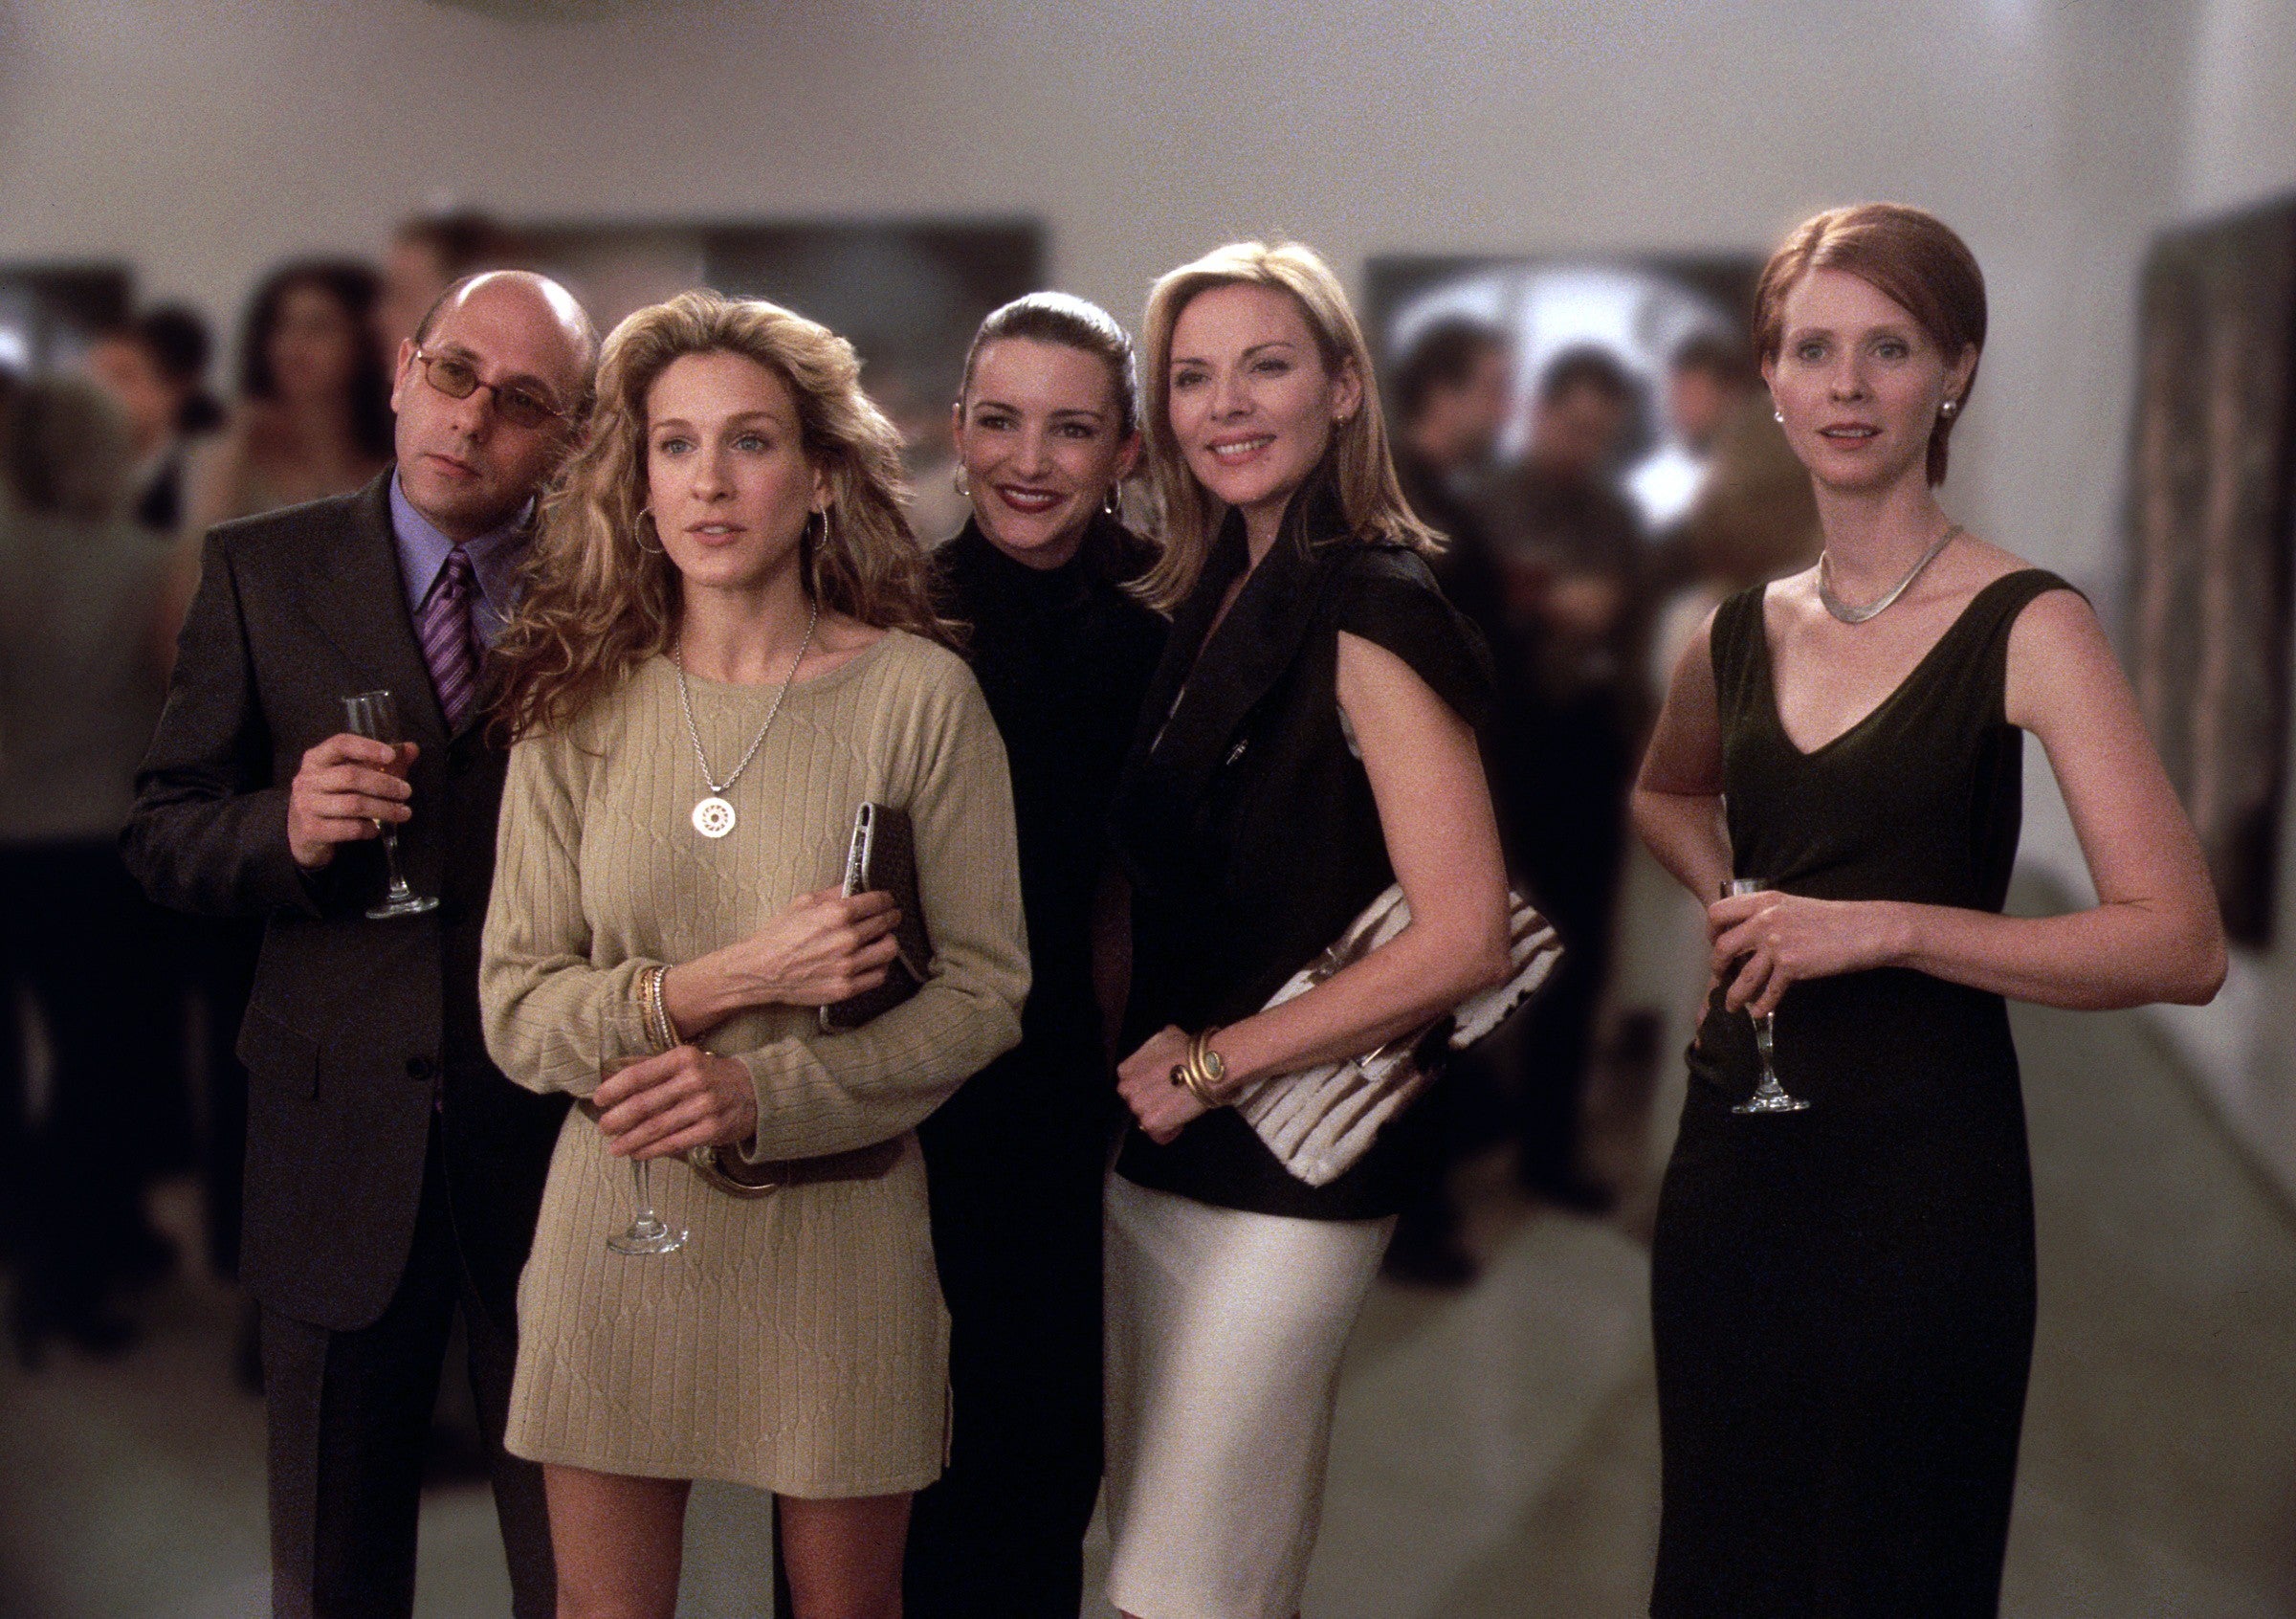 Nixon (right) with (from left) Willie Garson, Sarah Jessica Parker, Kristian Davis and Kim Cattrall in the third season of HBO comedy ‘Sex and the City’